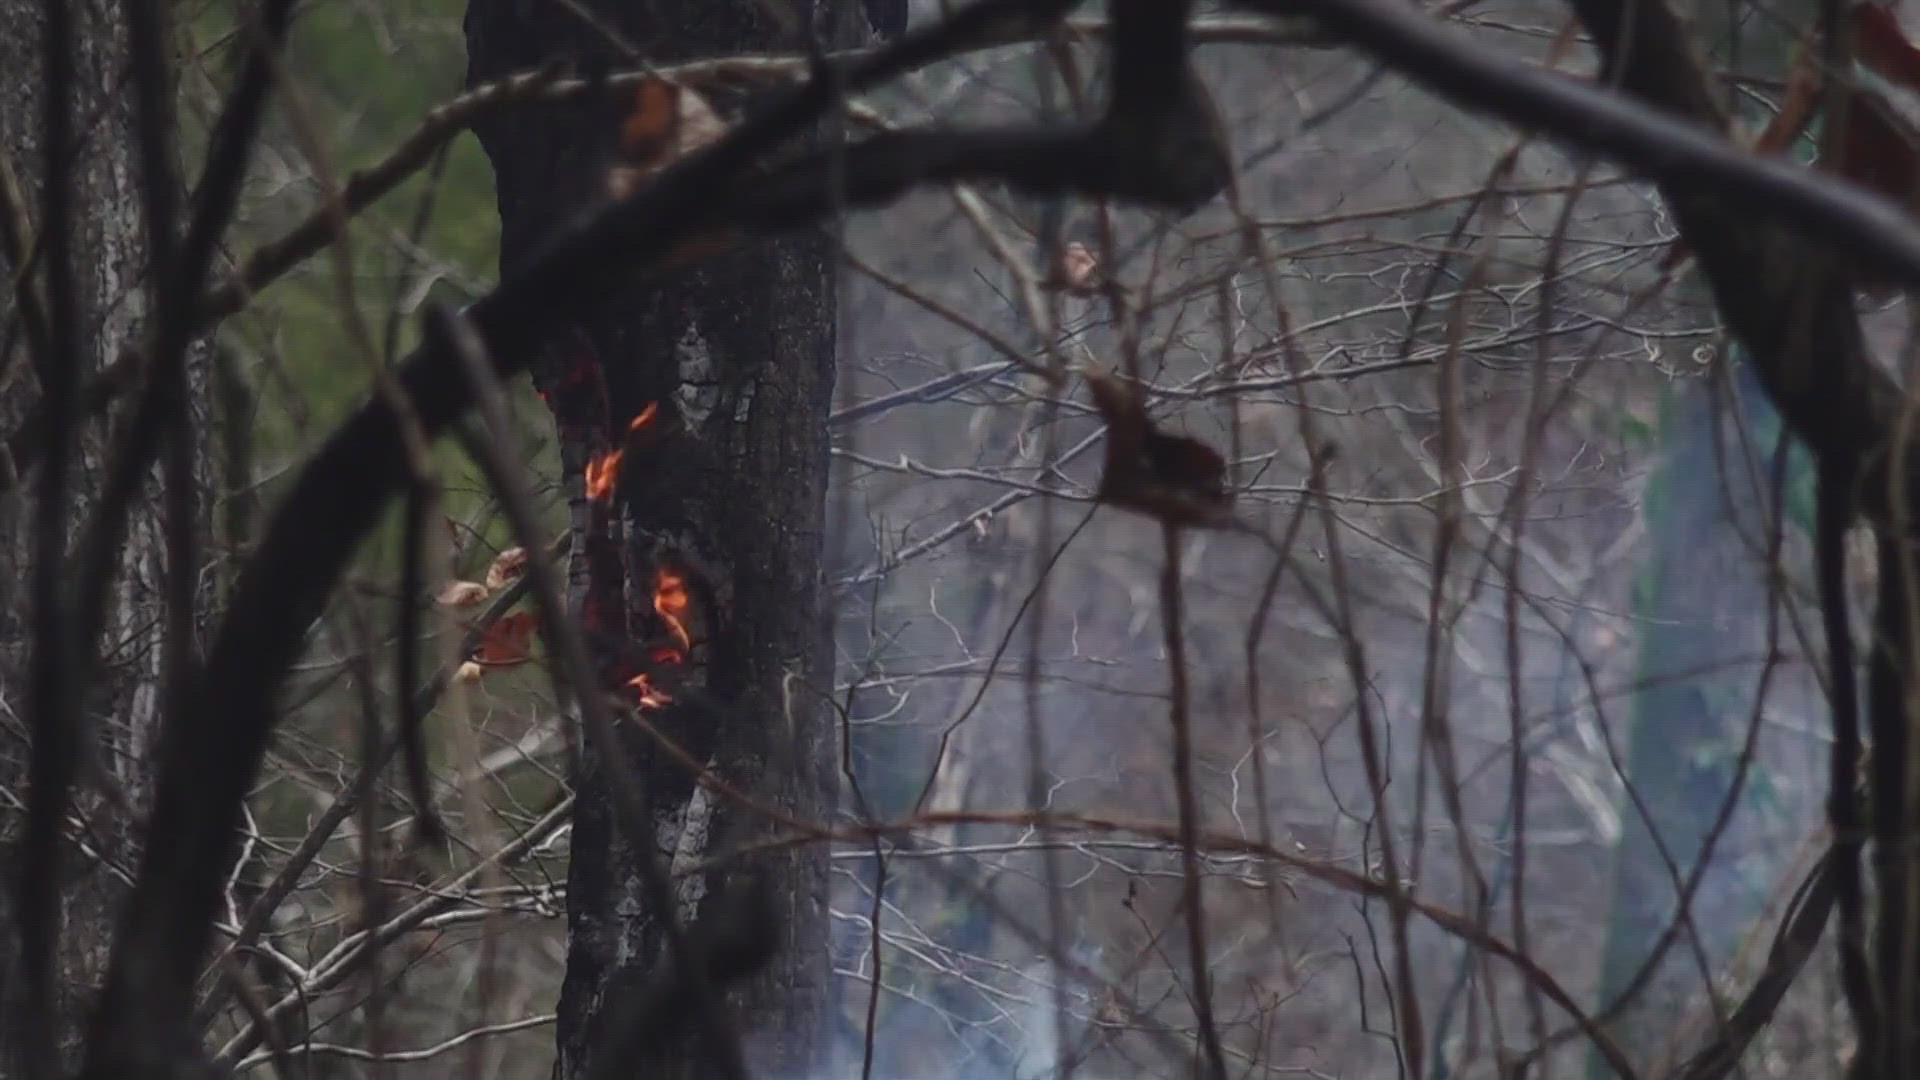 The National Park Service said an investigation indicated two fires were ignited on Nov. 20 in the Rich Mountain area.